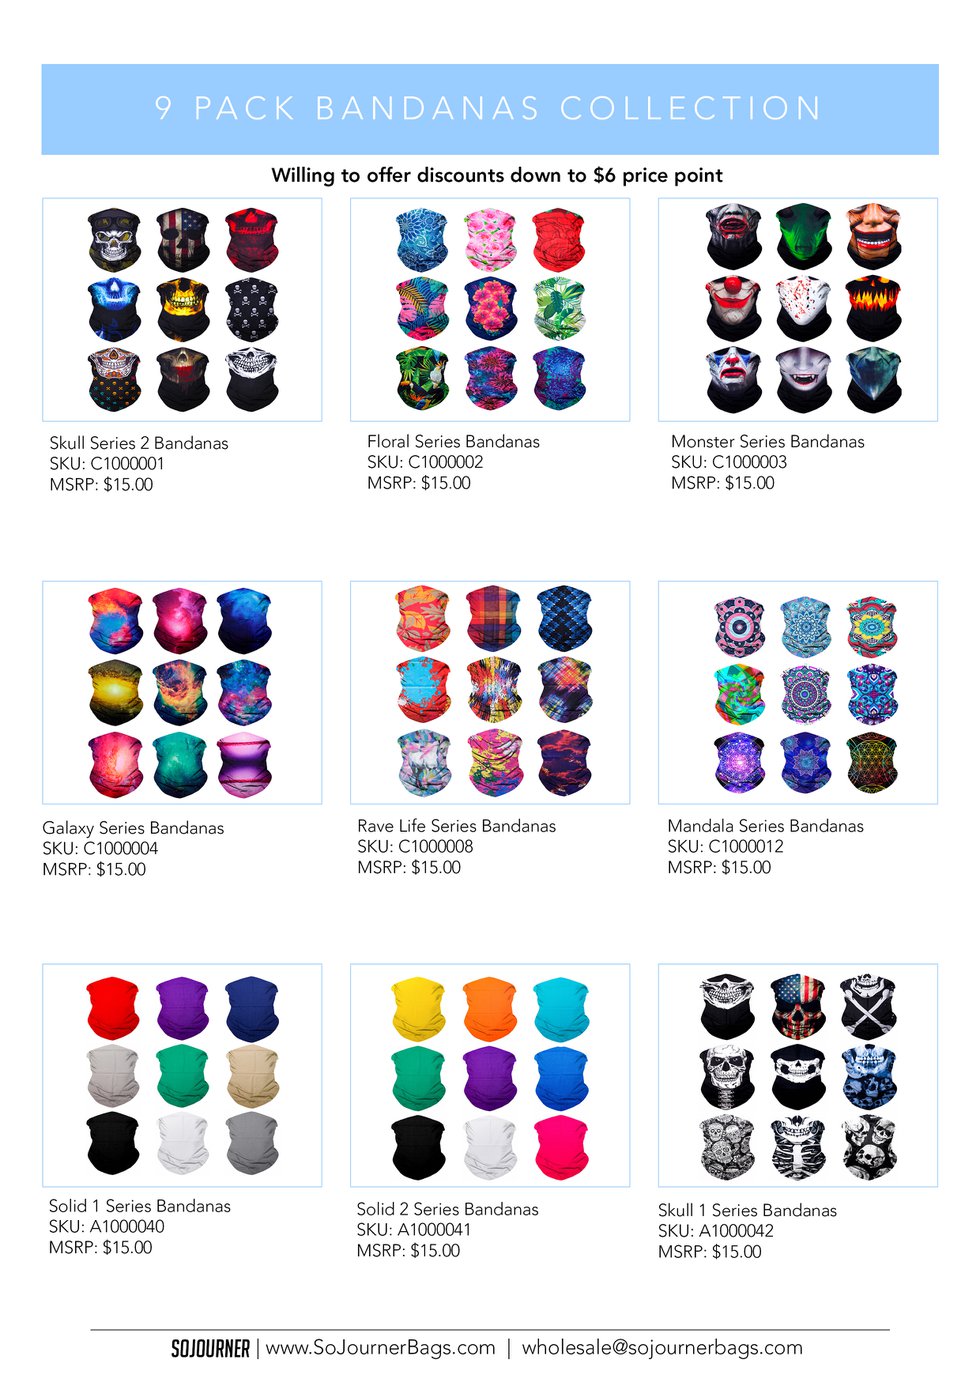 Wholesale 9 Pack Bandanas Collection A.jpg